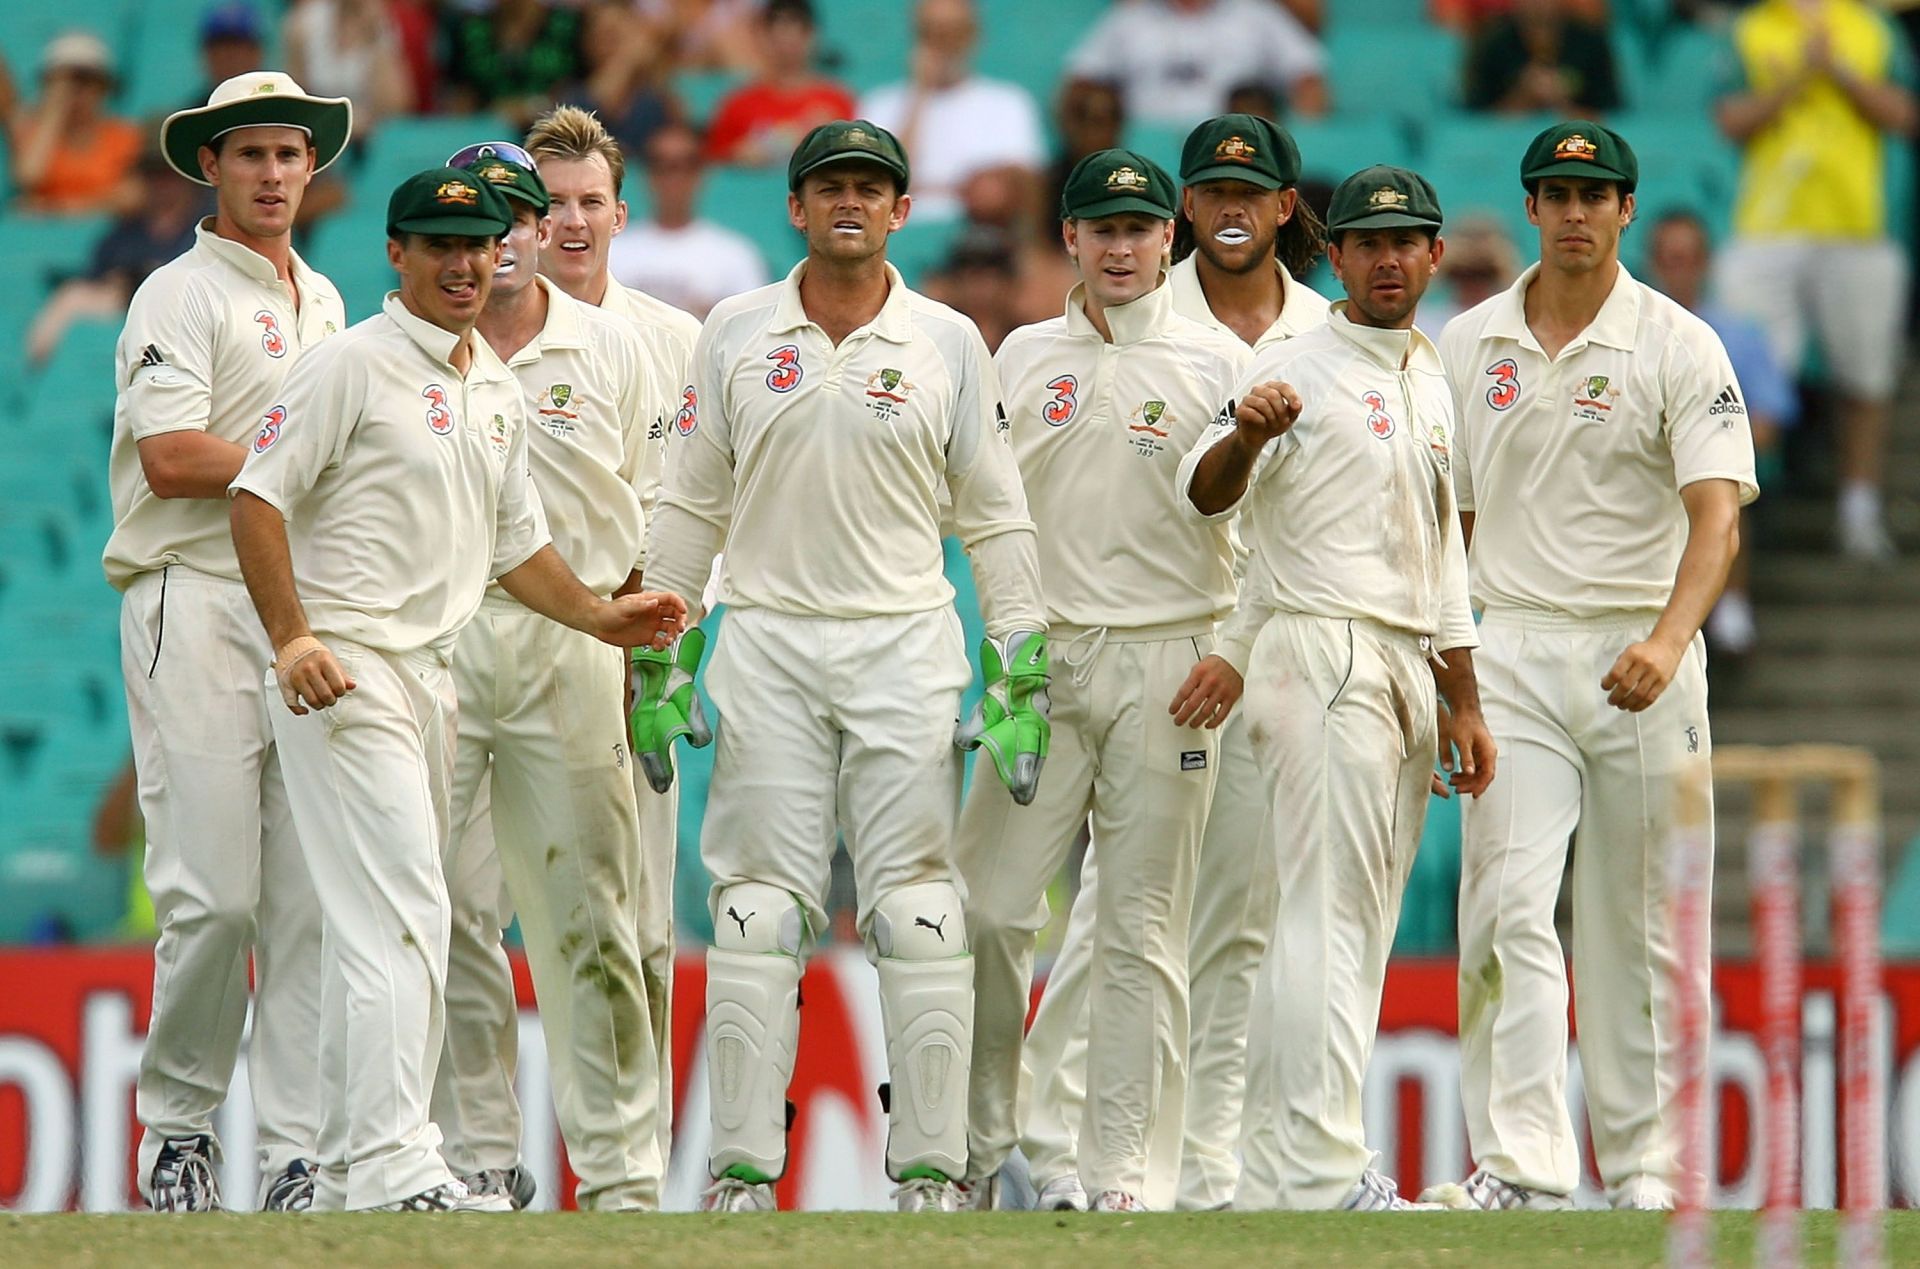 The 2008 Sydney Test between Australia and India made headlines for all the wrong reasons.